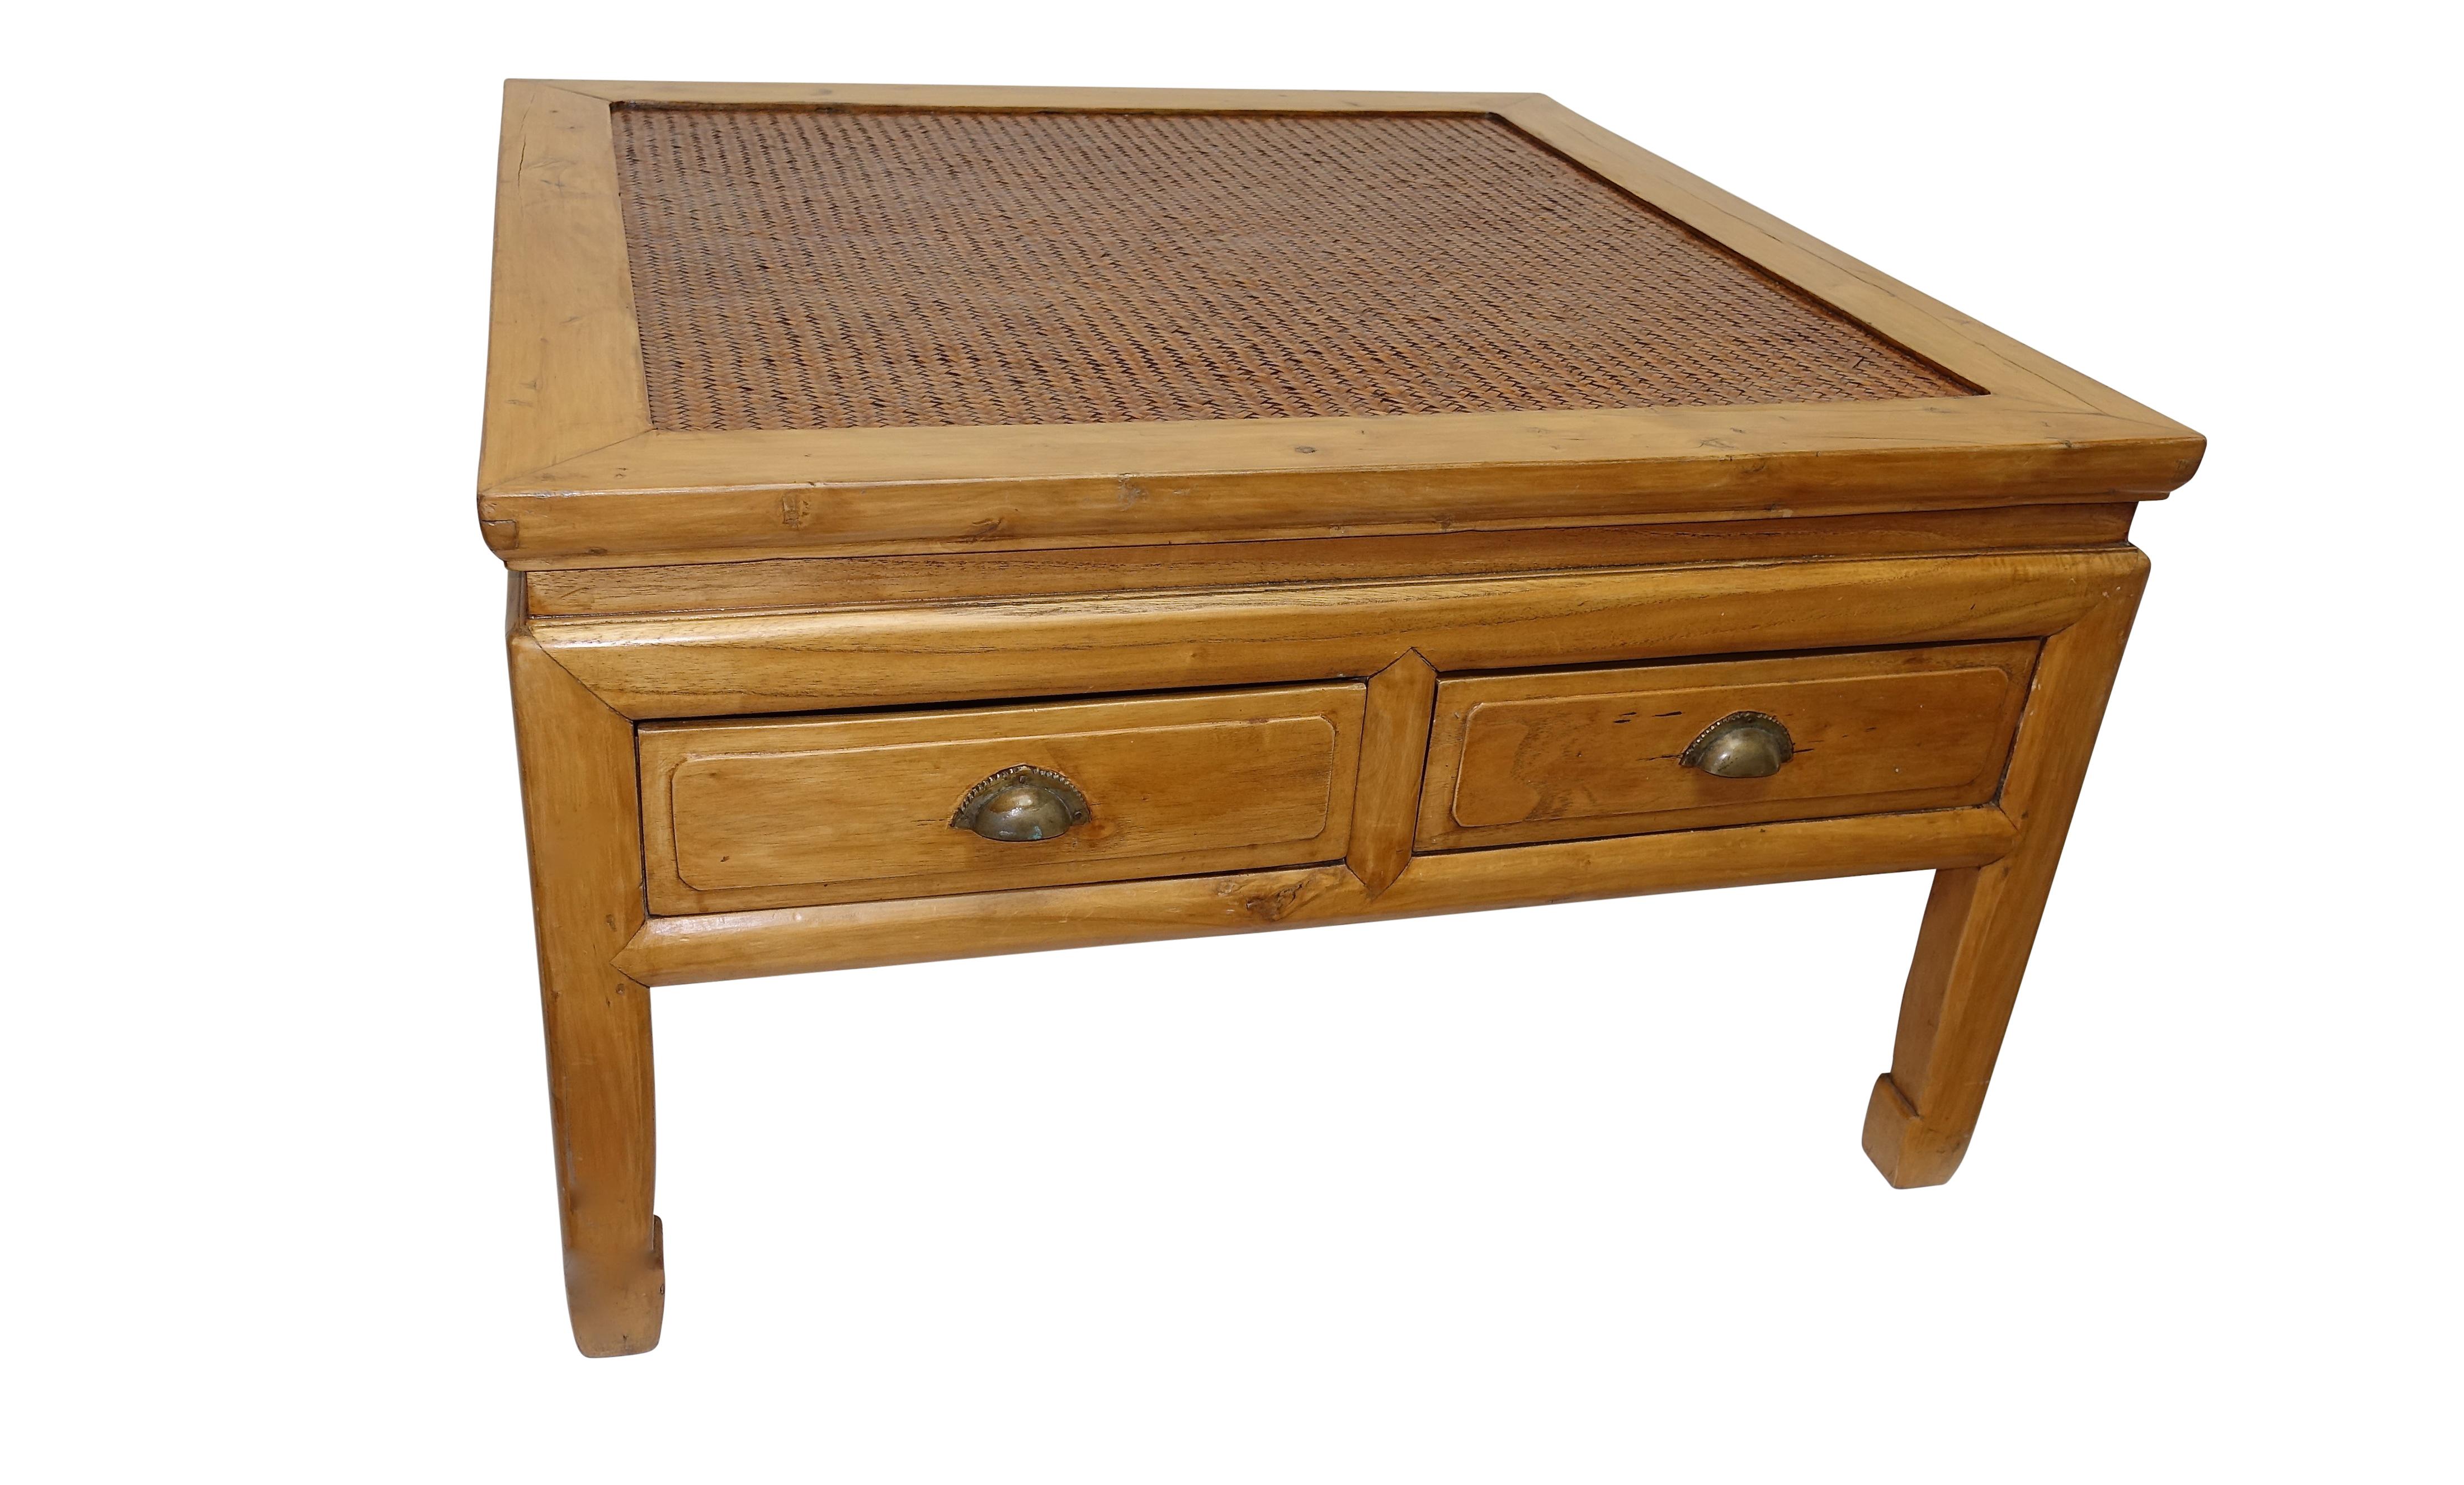 A low table with an inset woven panel top surface and having two drawers, China, late 19th-early 20th century.